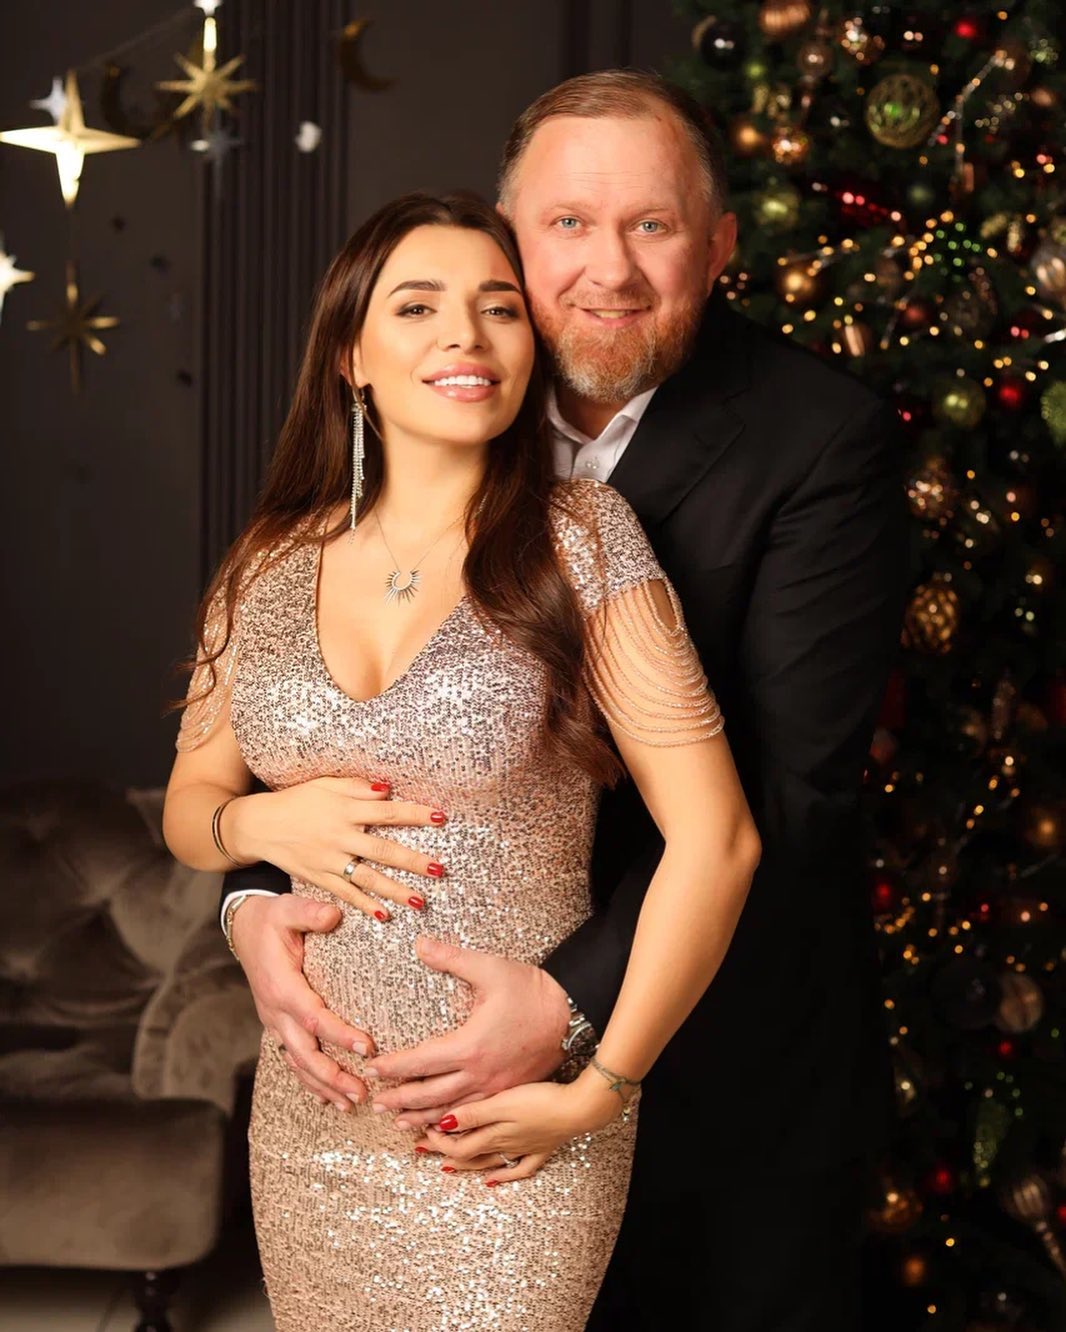 The pregnant wife of Konstantin Ivlev became a participant in the scandalous story